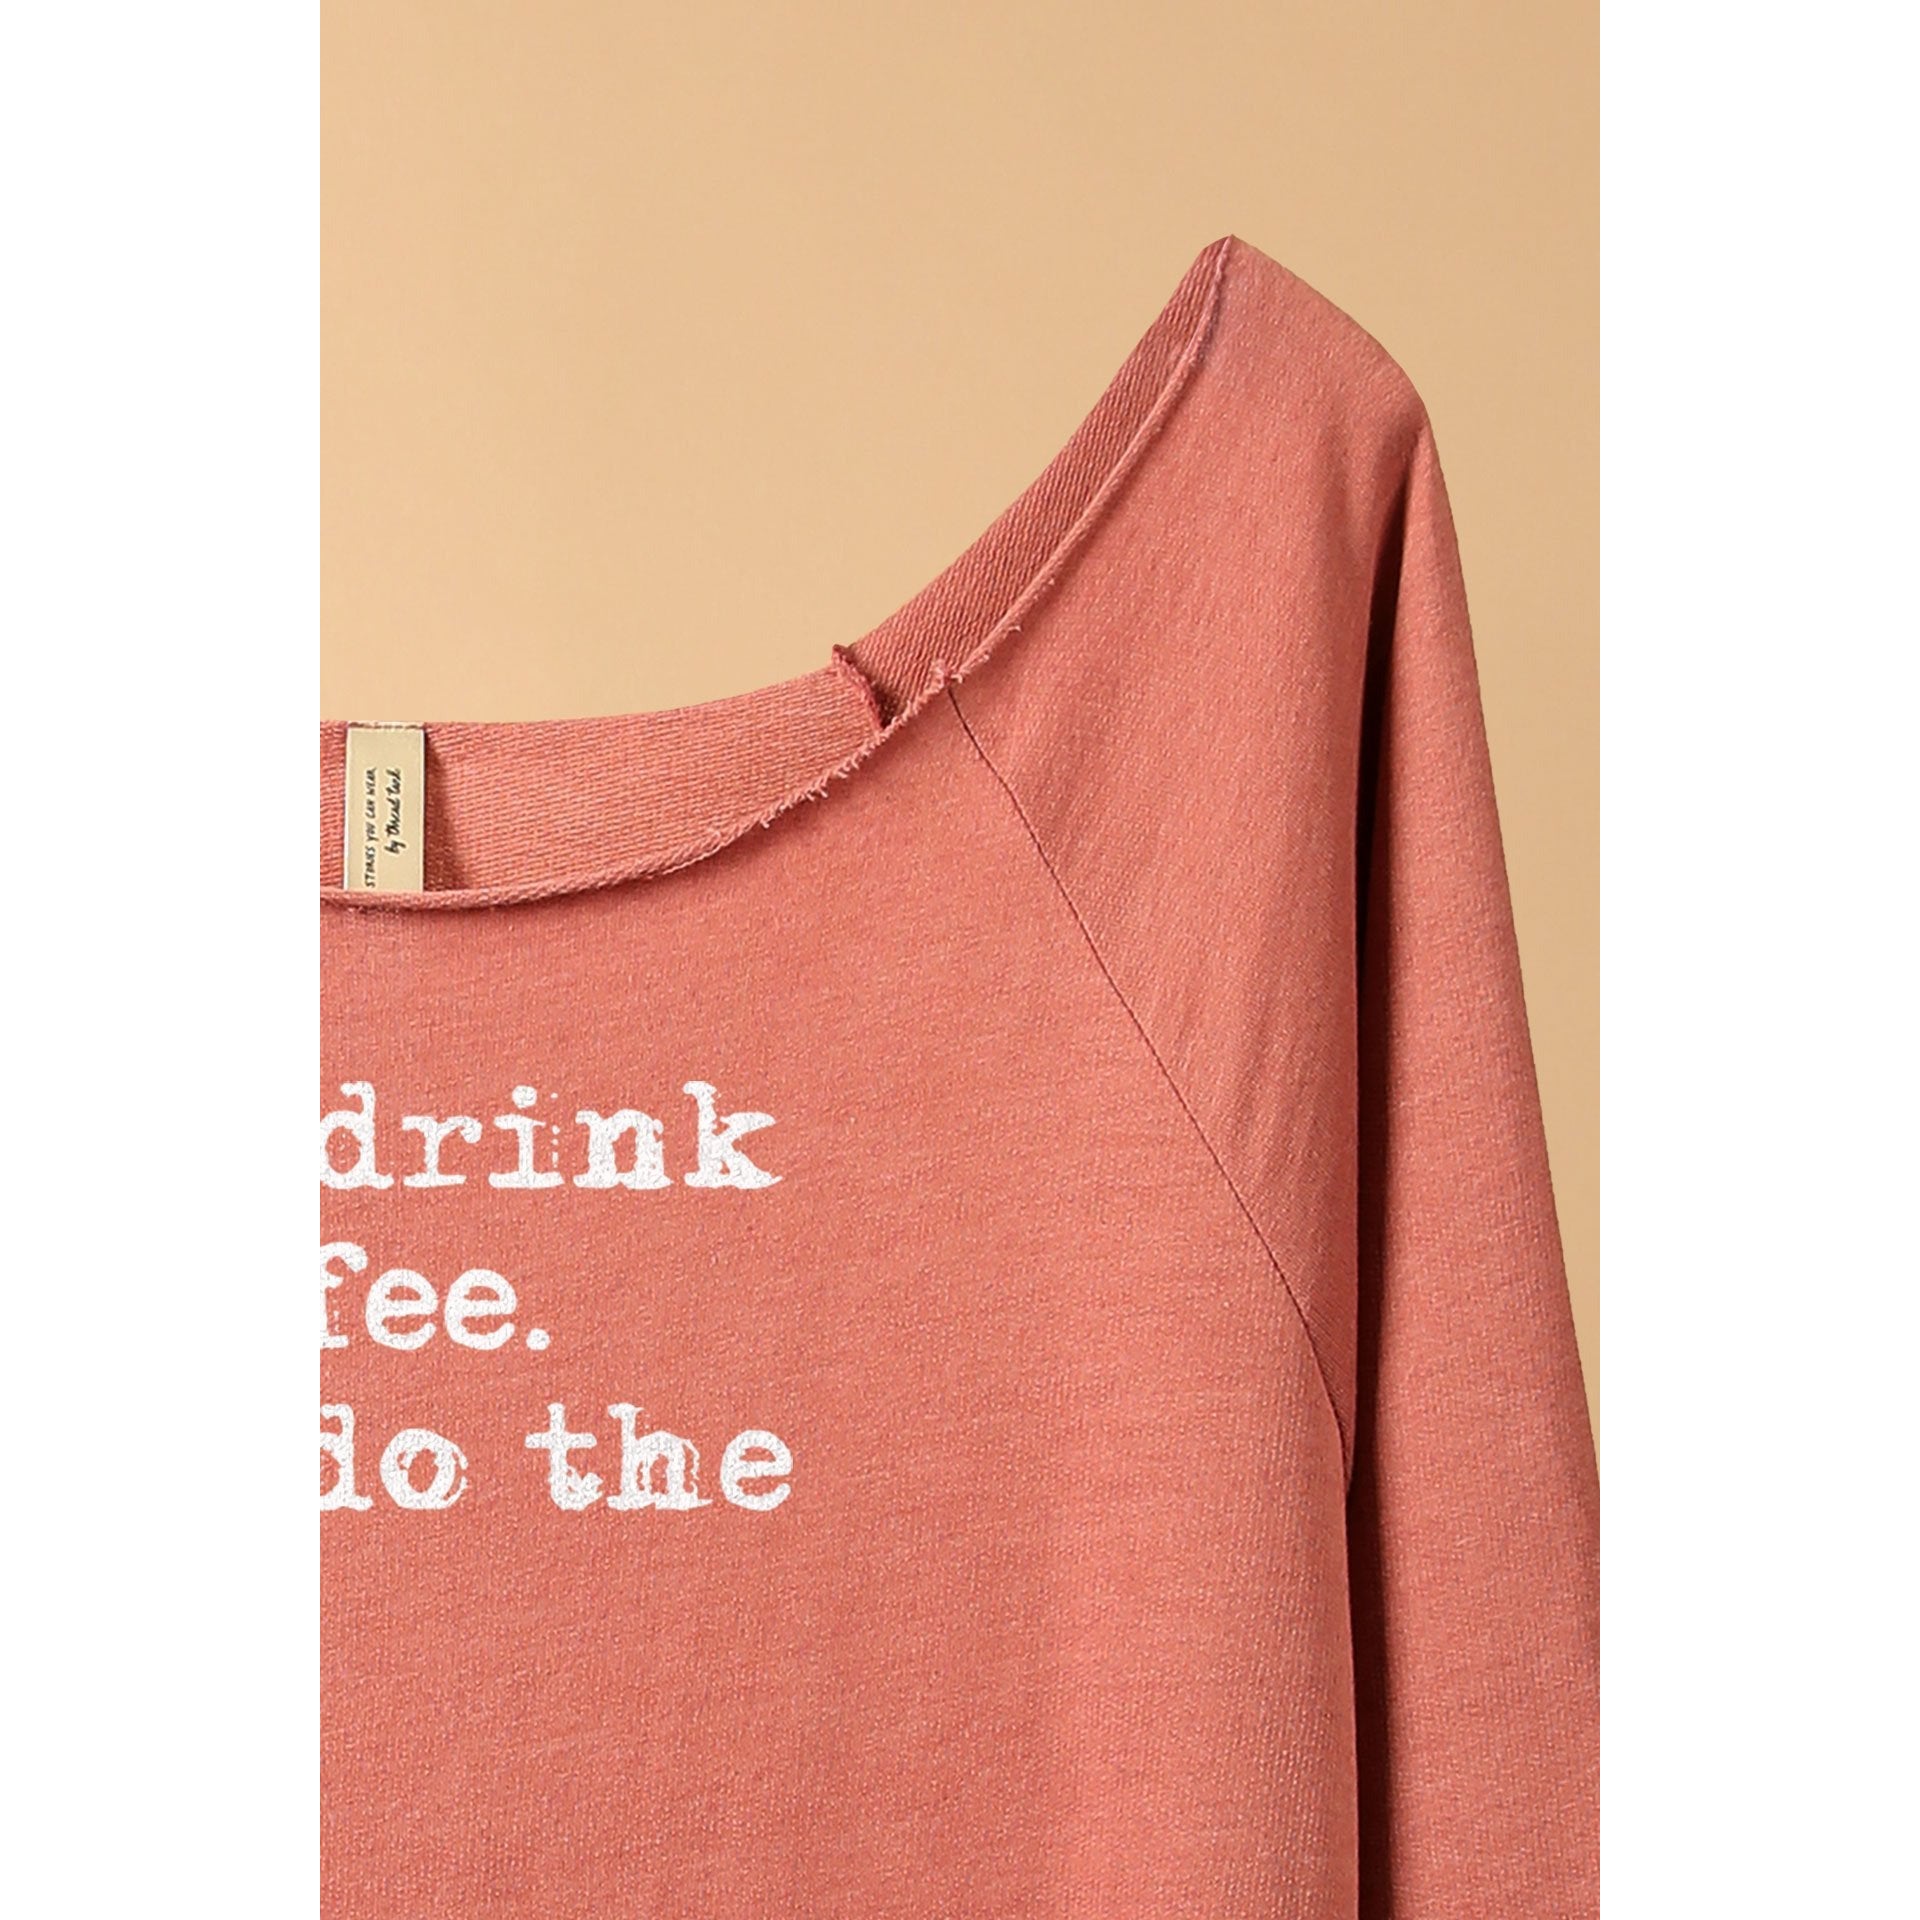 First I Drink The Coffee Then I Do The Things - threadtank | stories you can wear